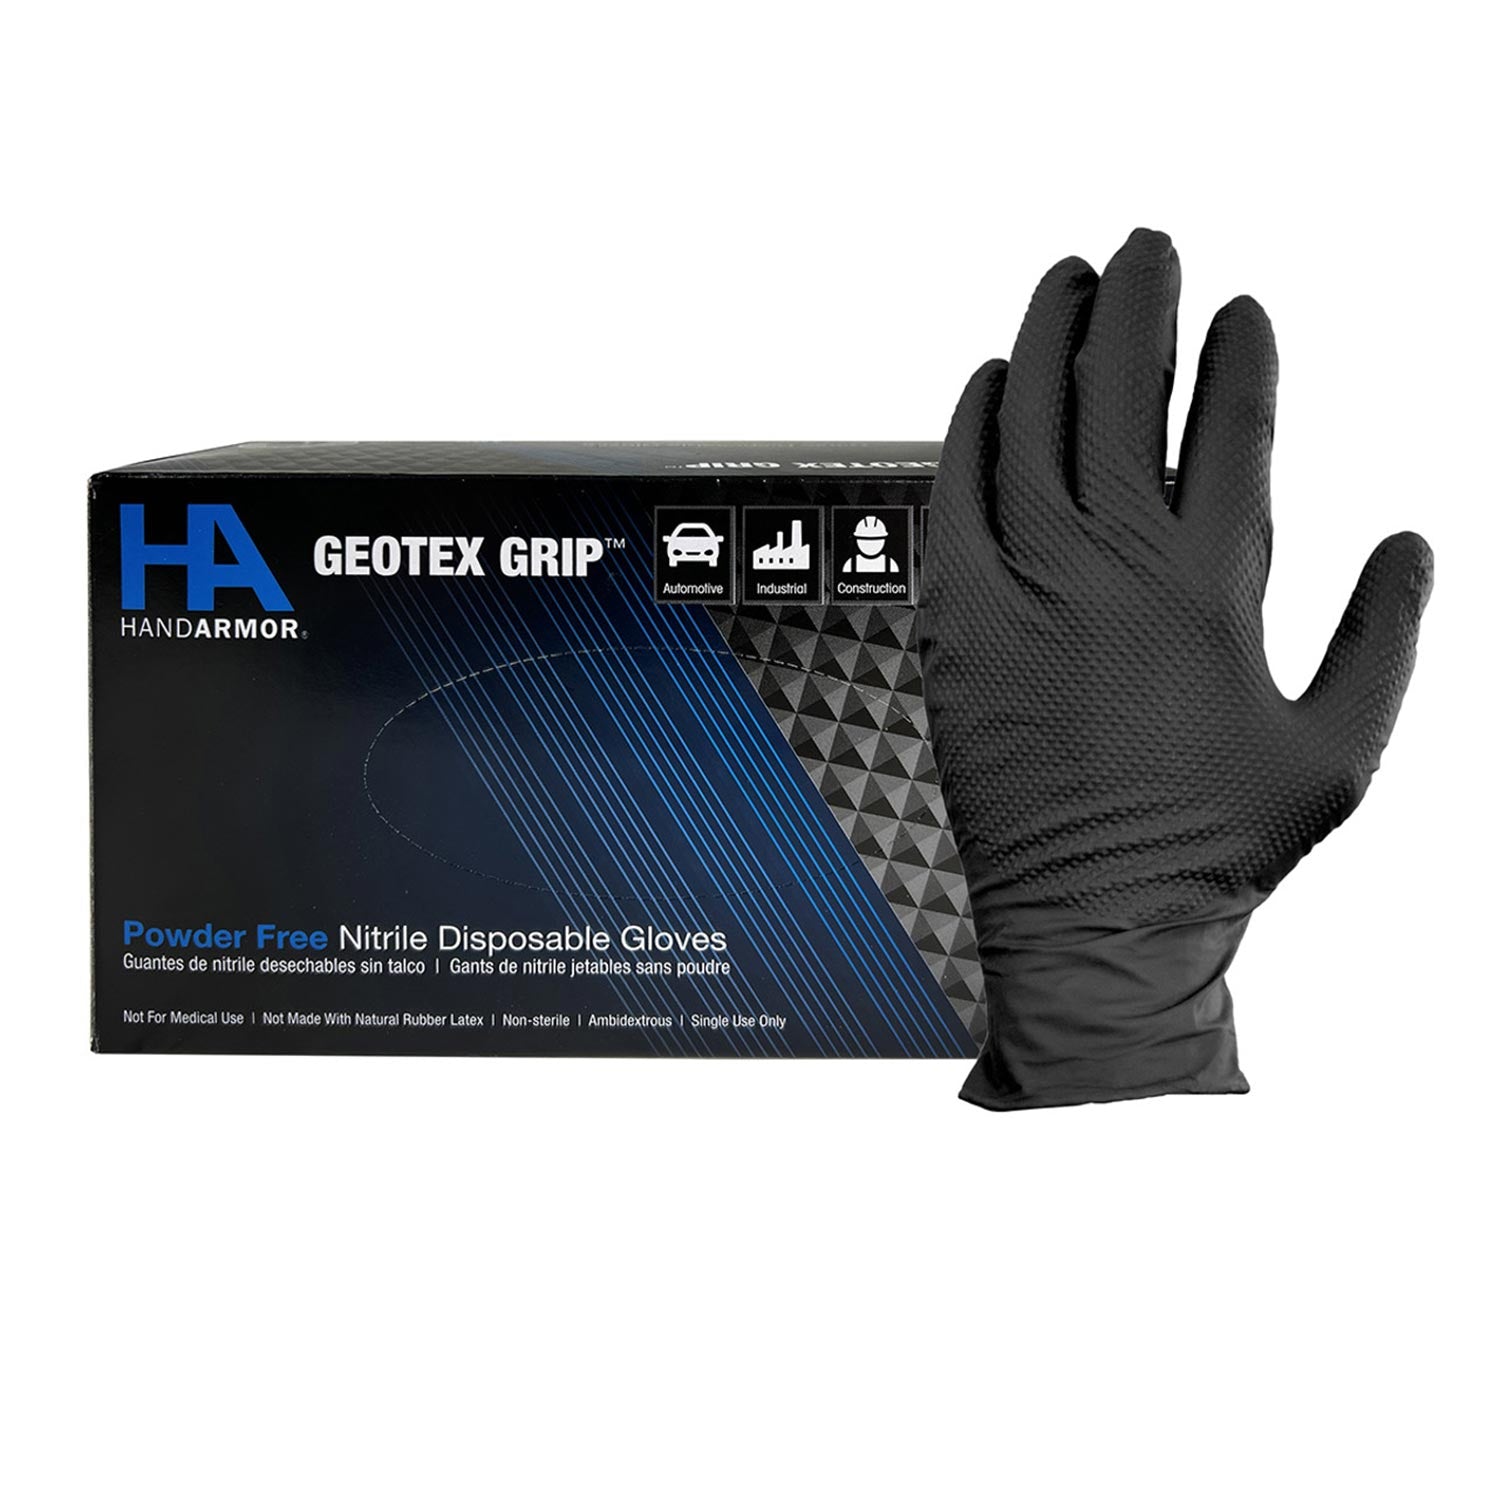 Hand Armor Disposable Nitrile Gloves 9 mil - Textured Grip (100 count box)